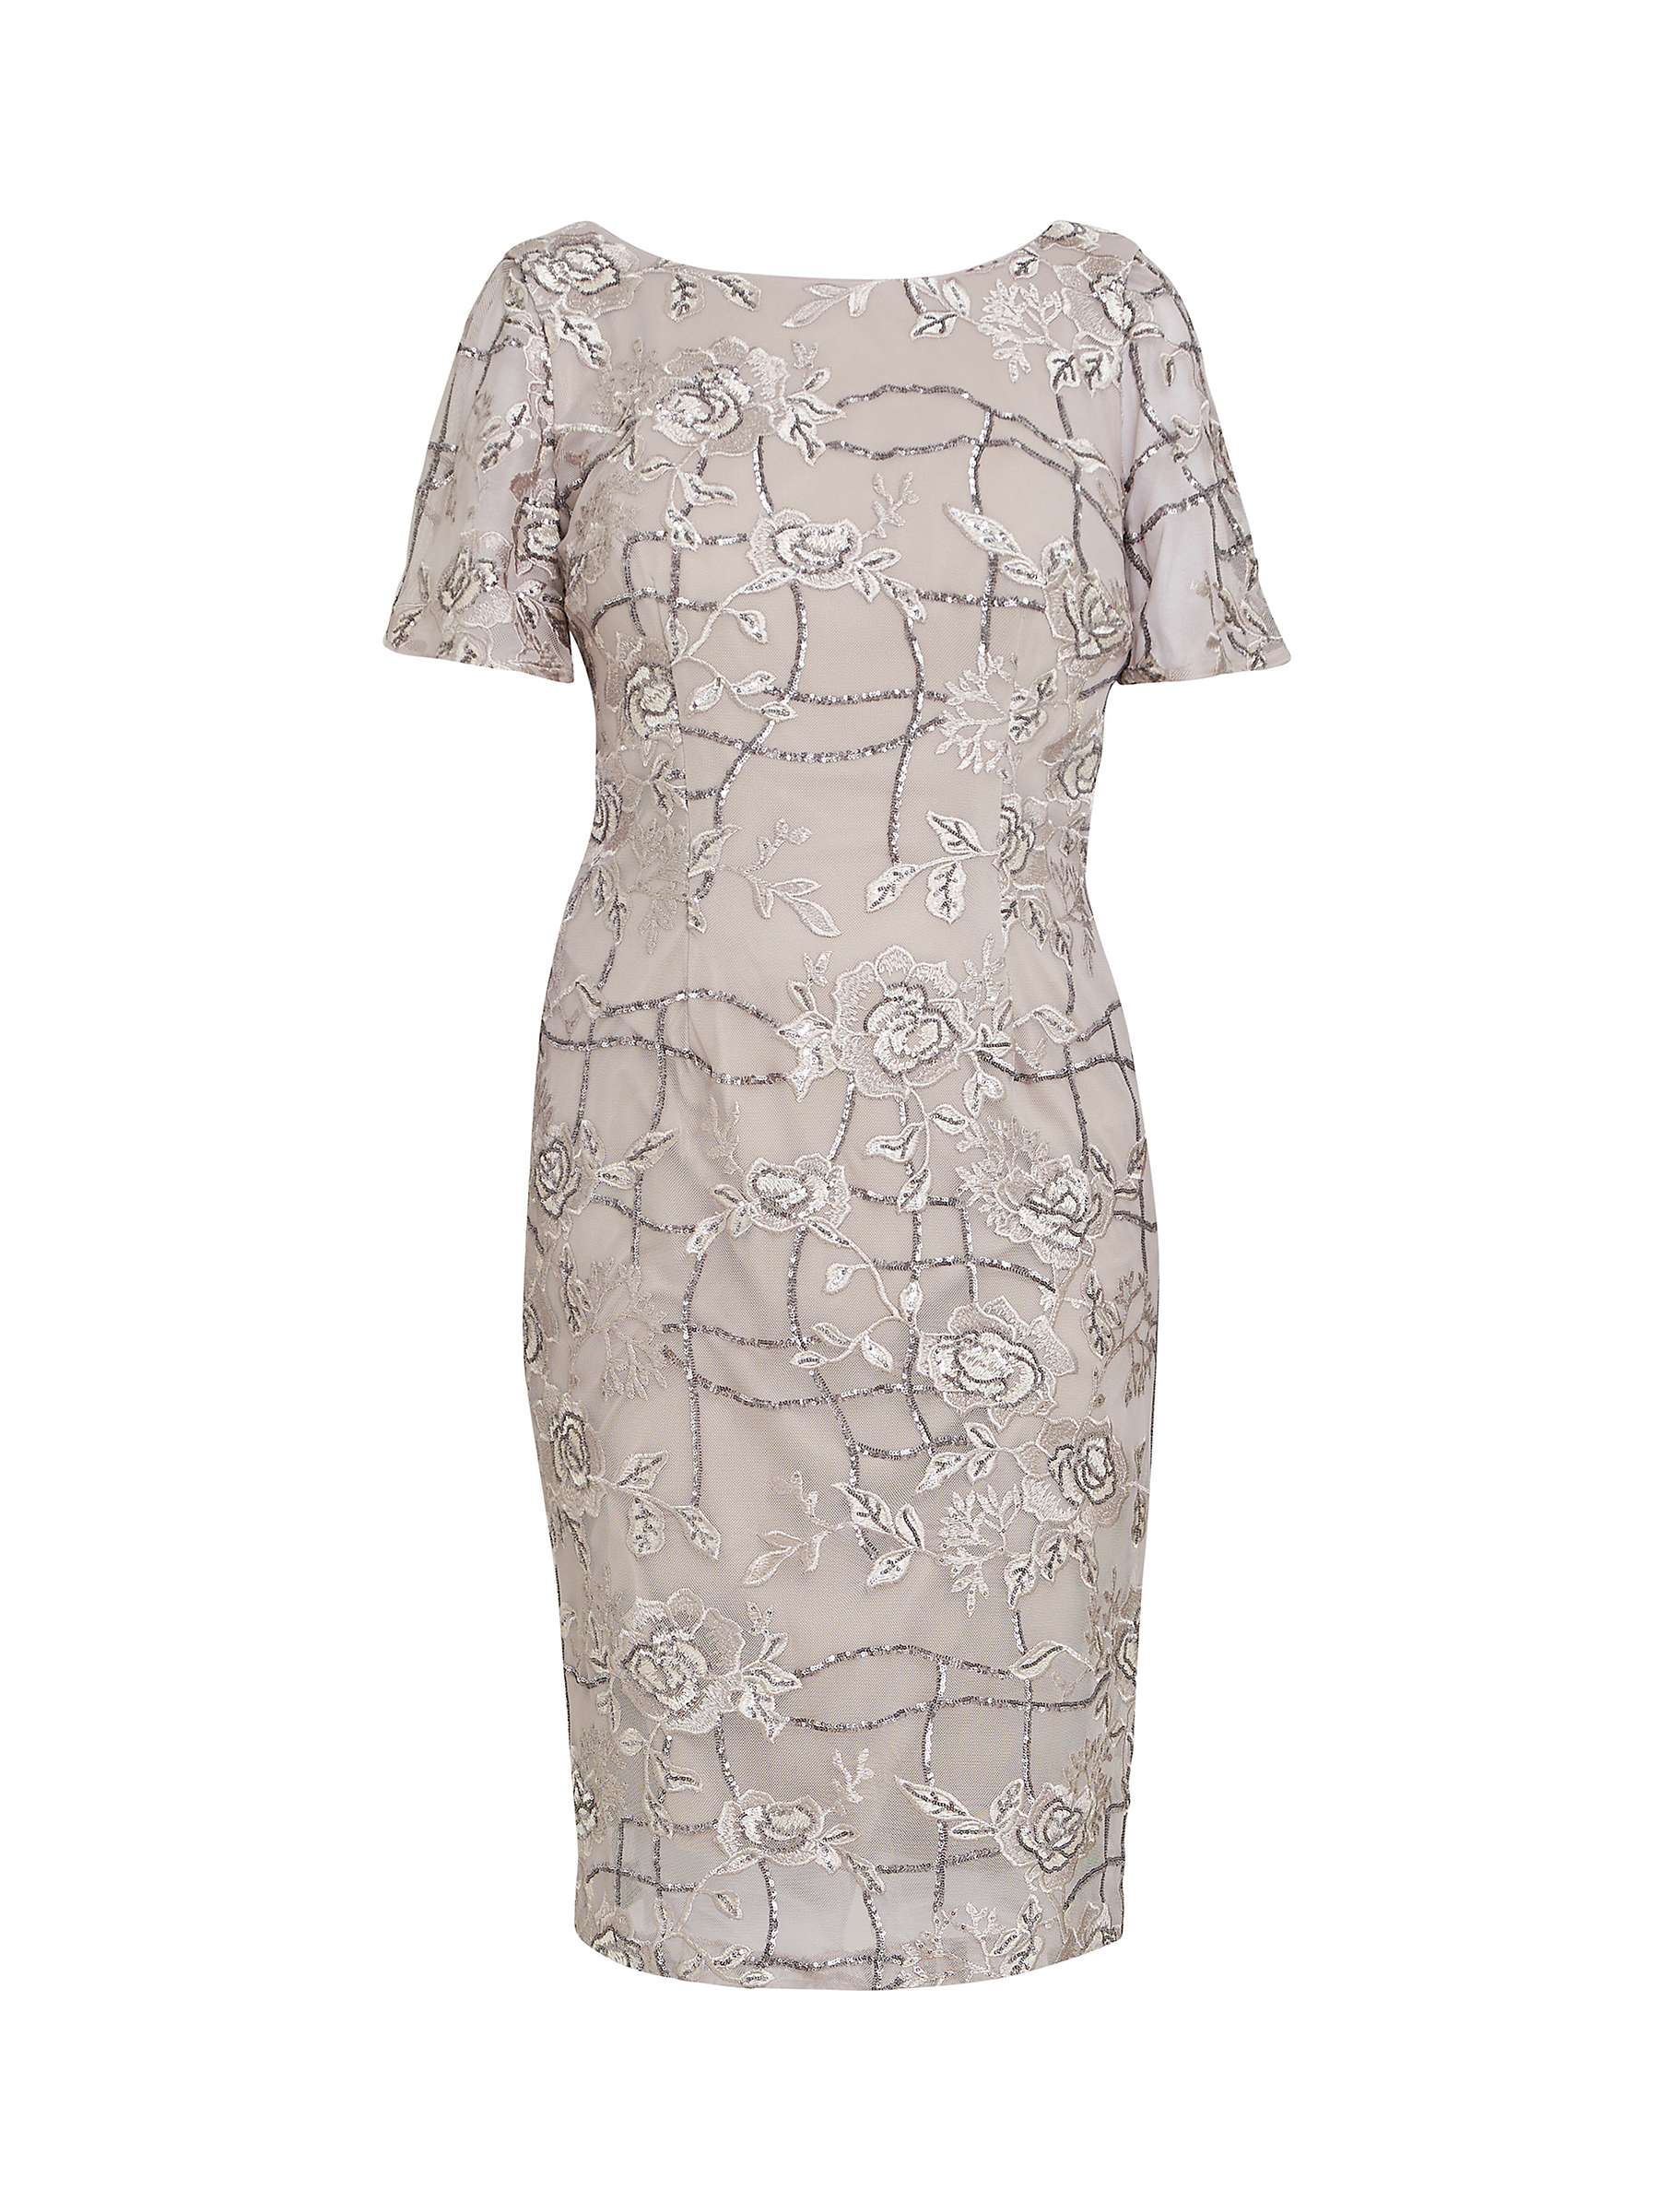 Gina Bacconi Claire Embroidered Shift Dress, Taupe at John Lewis & Partners